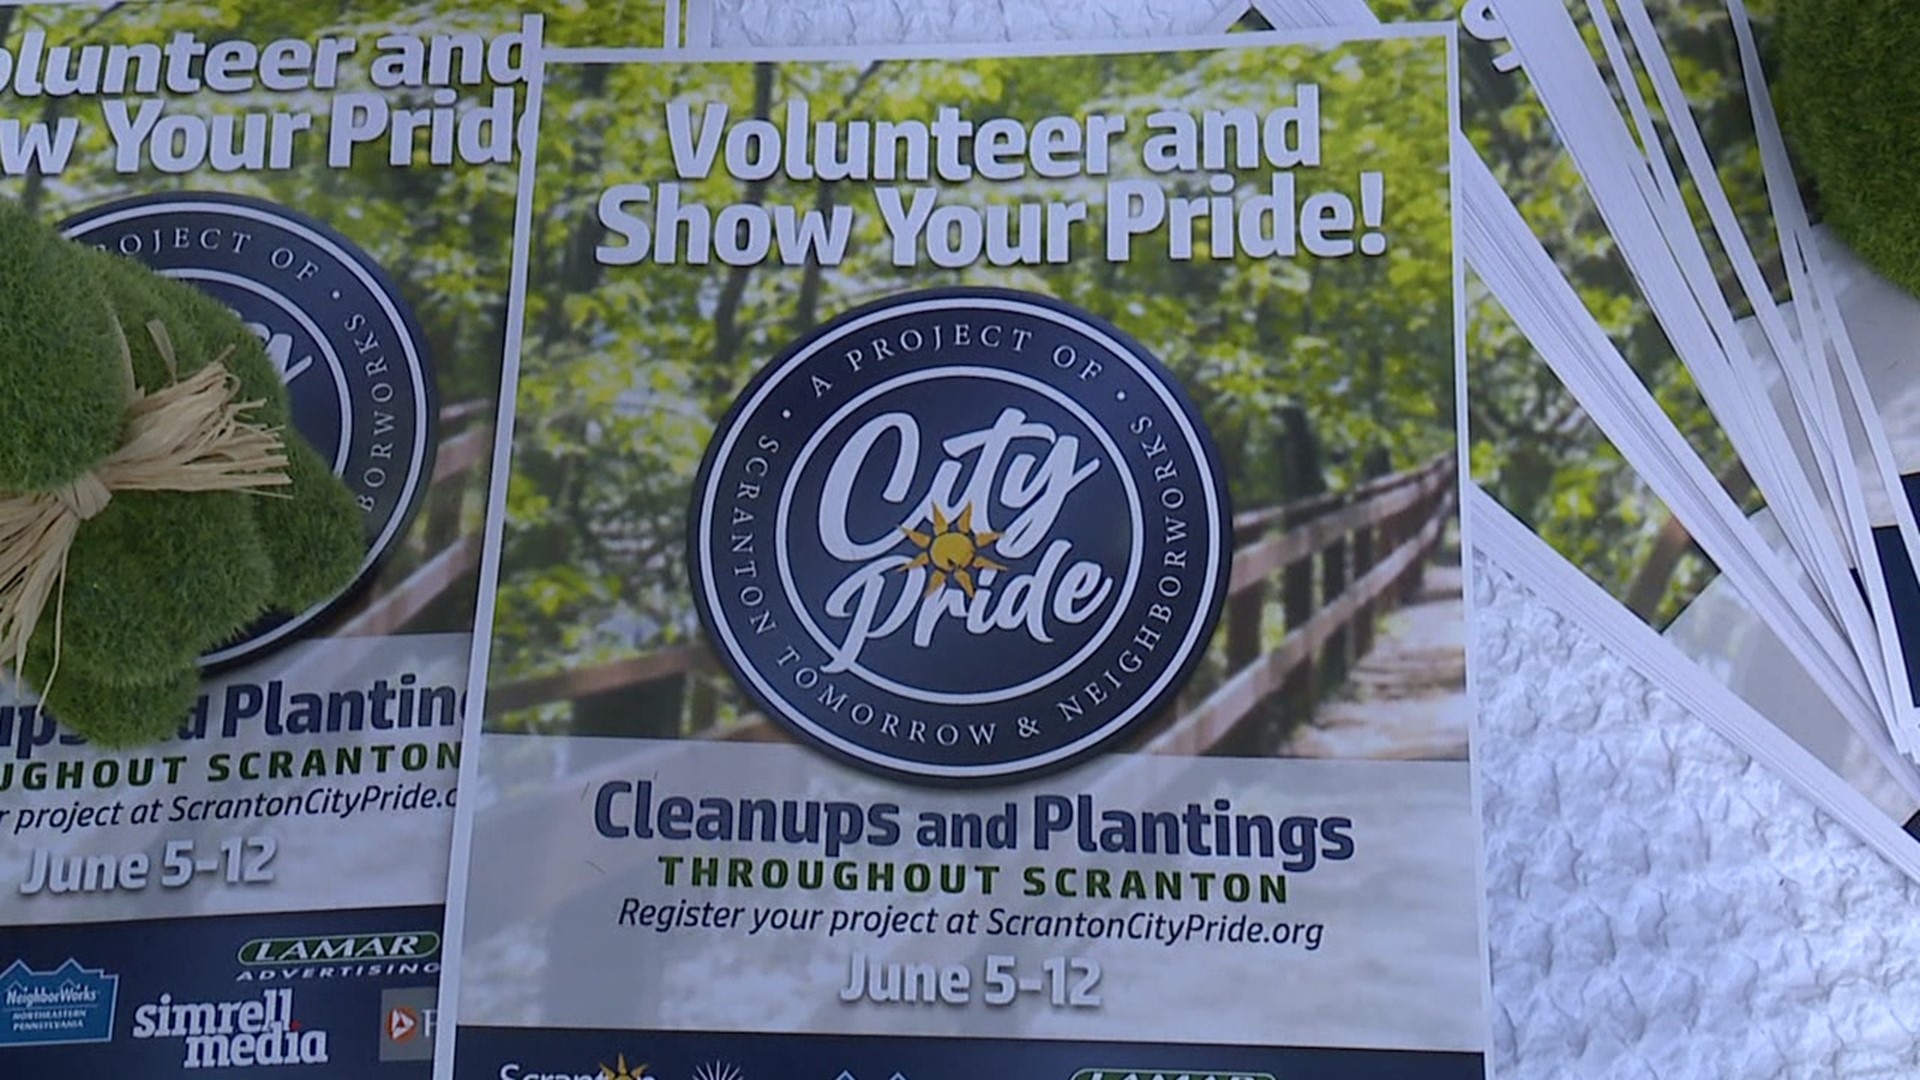 Organizers say community cleanups and beautification programs help combat blight and enhance the quality of life.